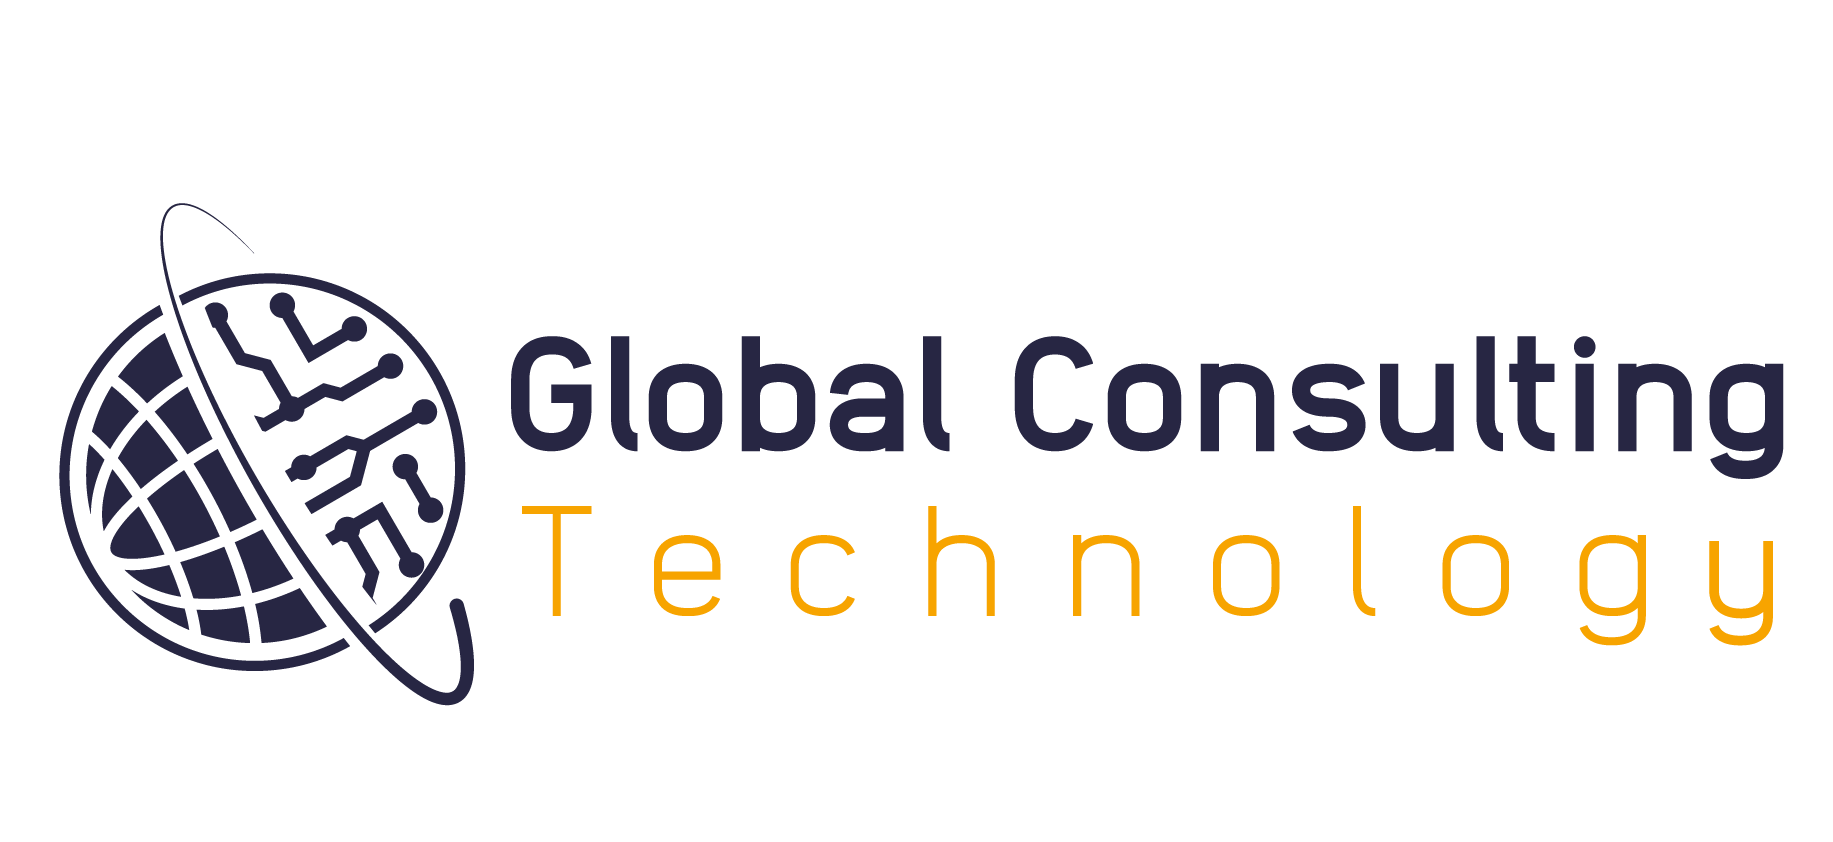 Global consulting Technology